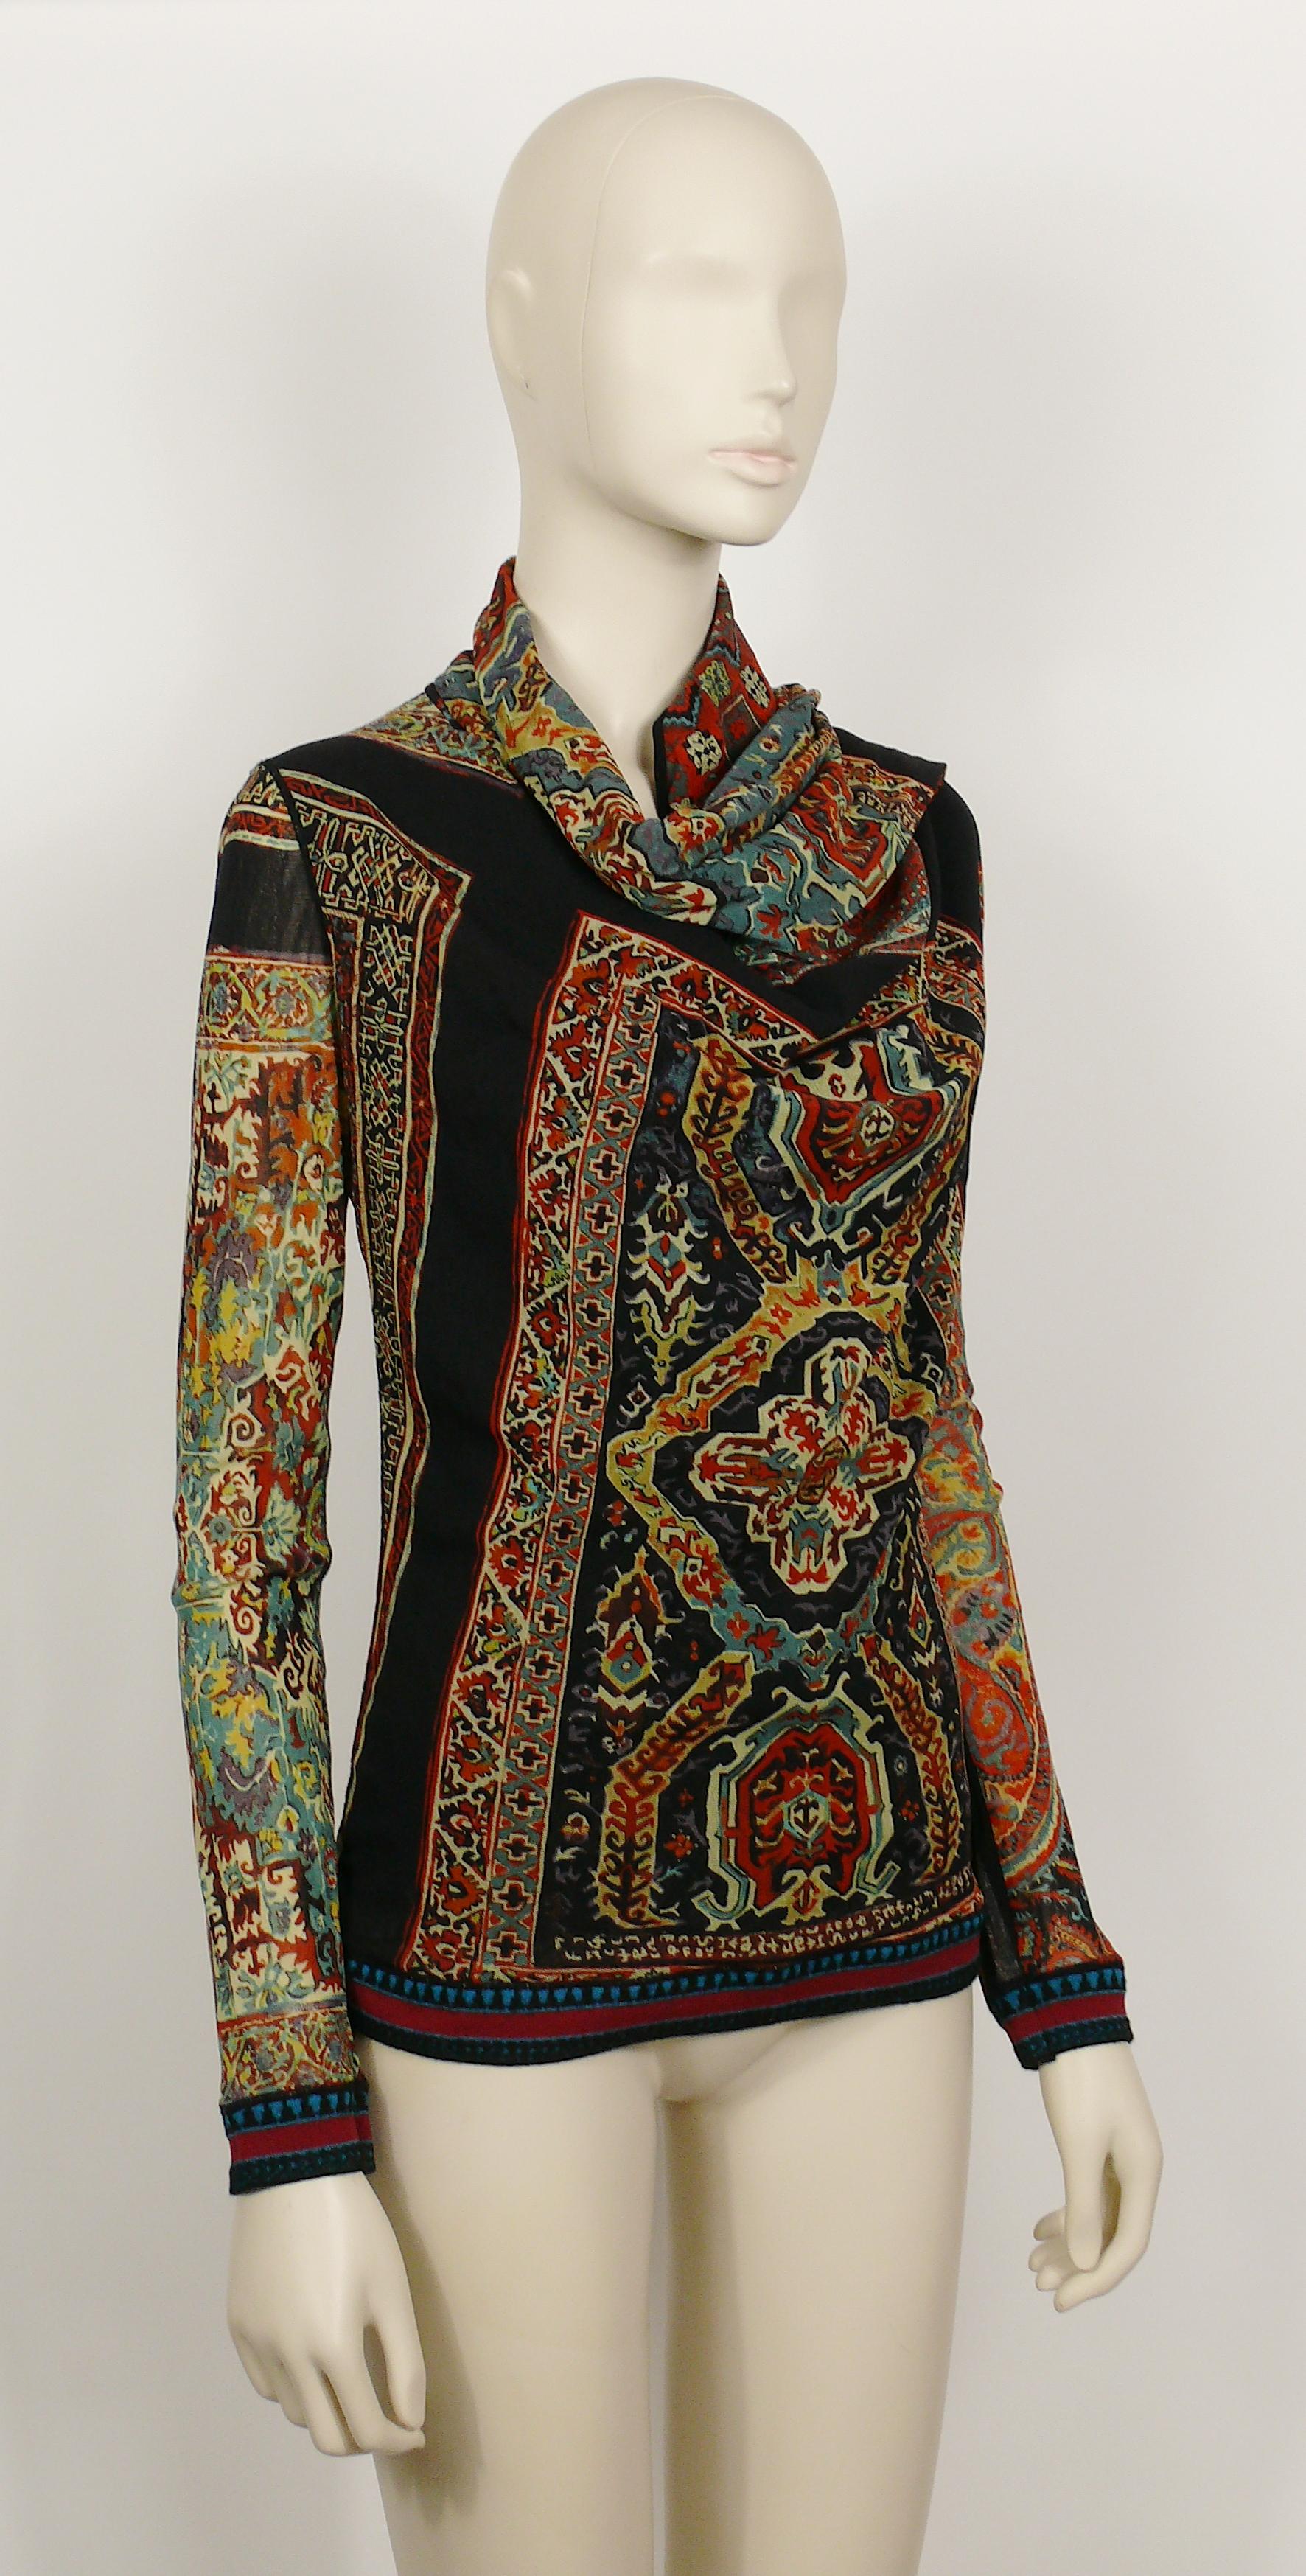 JEAN PAUL GAULTIER vintage scarf collar mesh top featuring a multicolor kilim print.

This top features a scarf collar (with attached scarf - see photo 7), a black mesh lining on front and back (the sleeves are sheer) and knitted trims on cuffs and